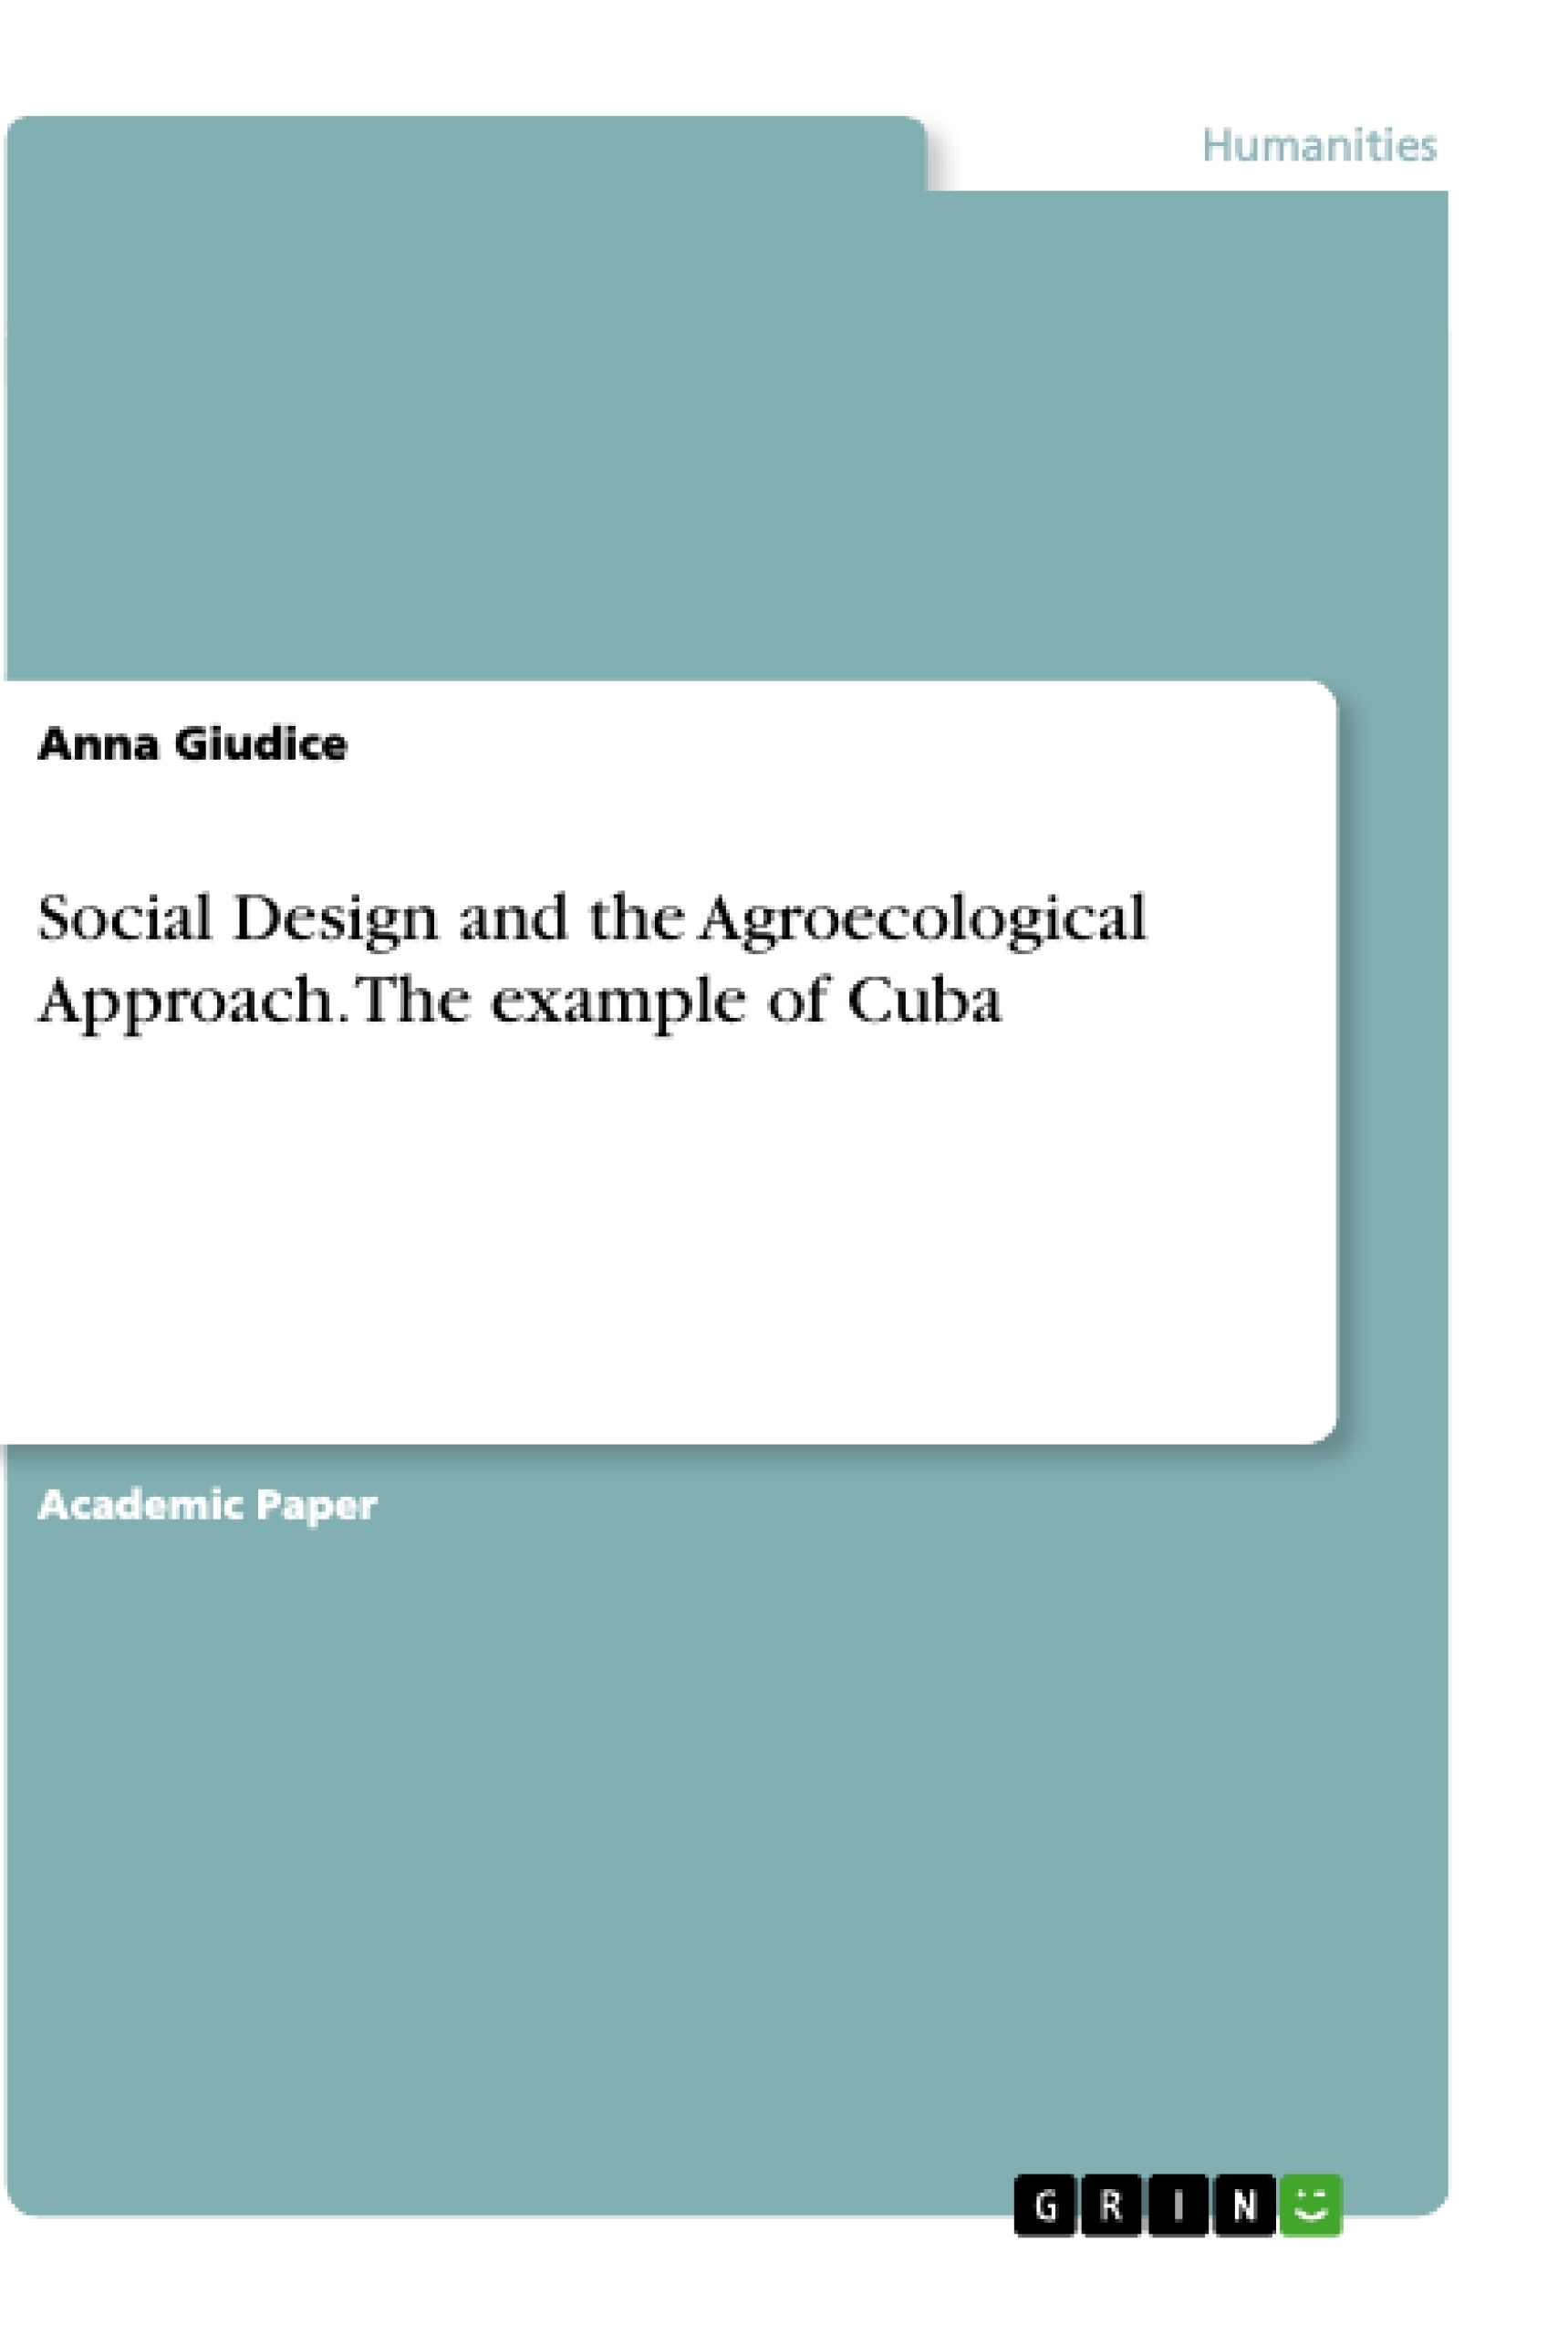 Title: Social Design and the Agroecological Approach. The example of Cuba